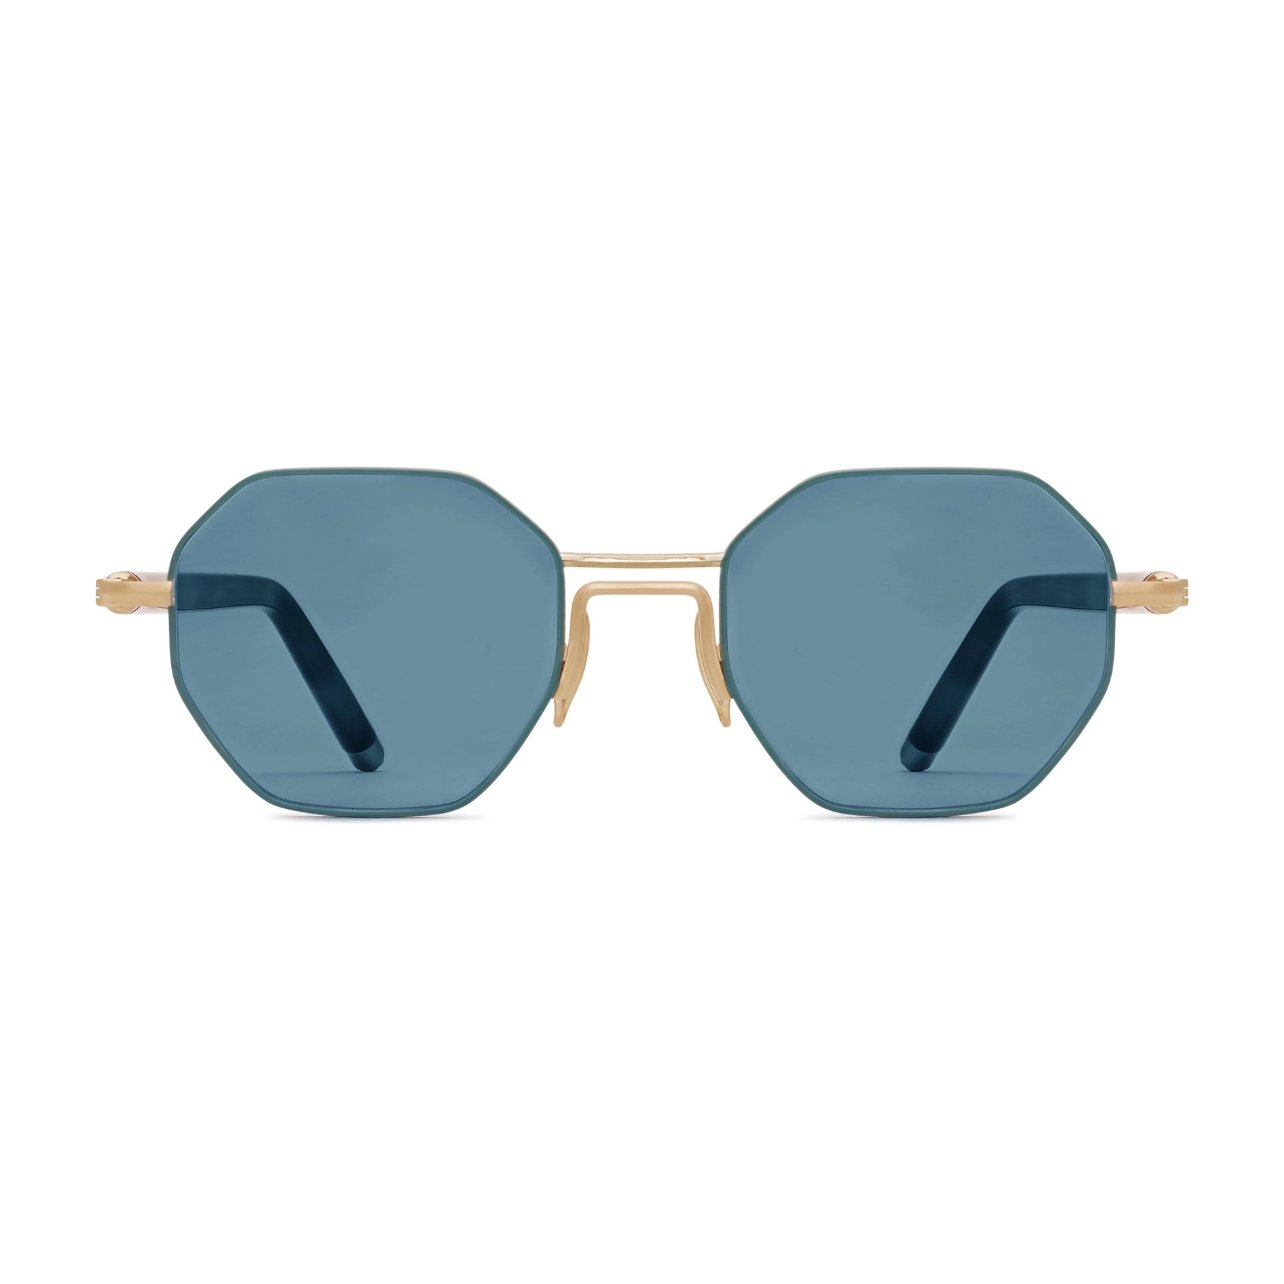 Morgenthal Frederics sunglasses in matte gold and blonde tortoise with blue tint